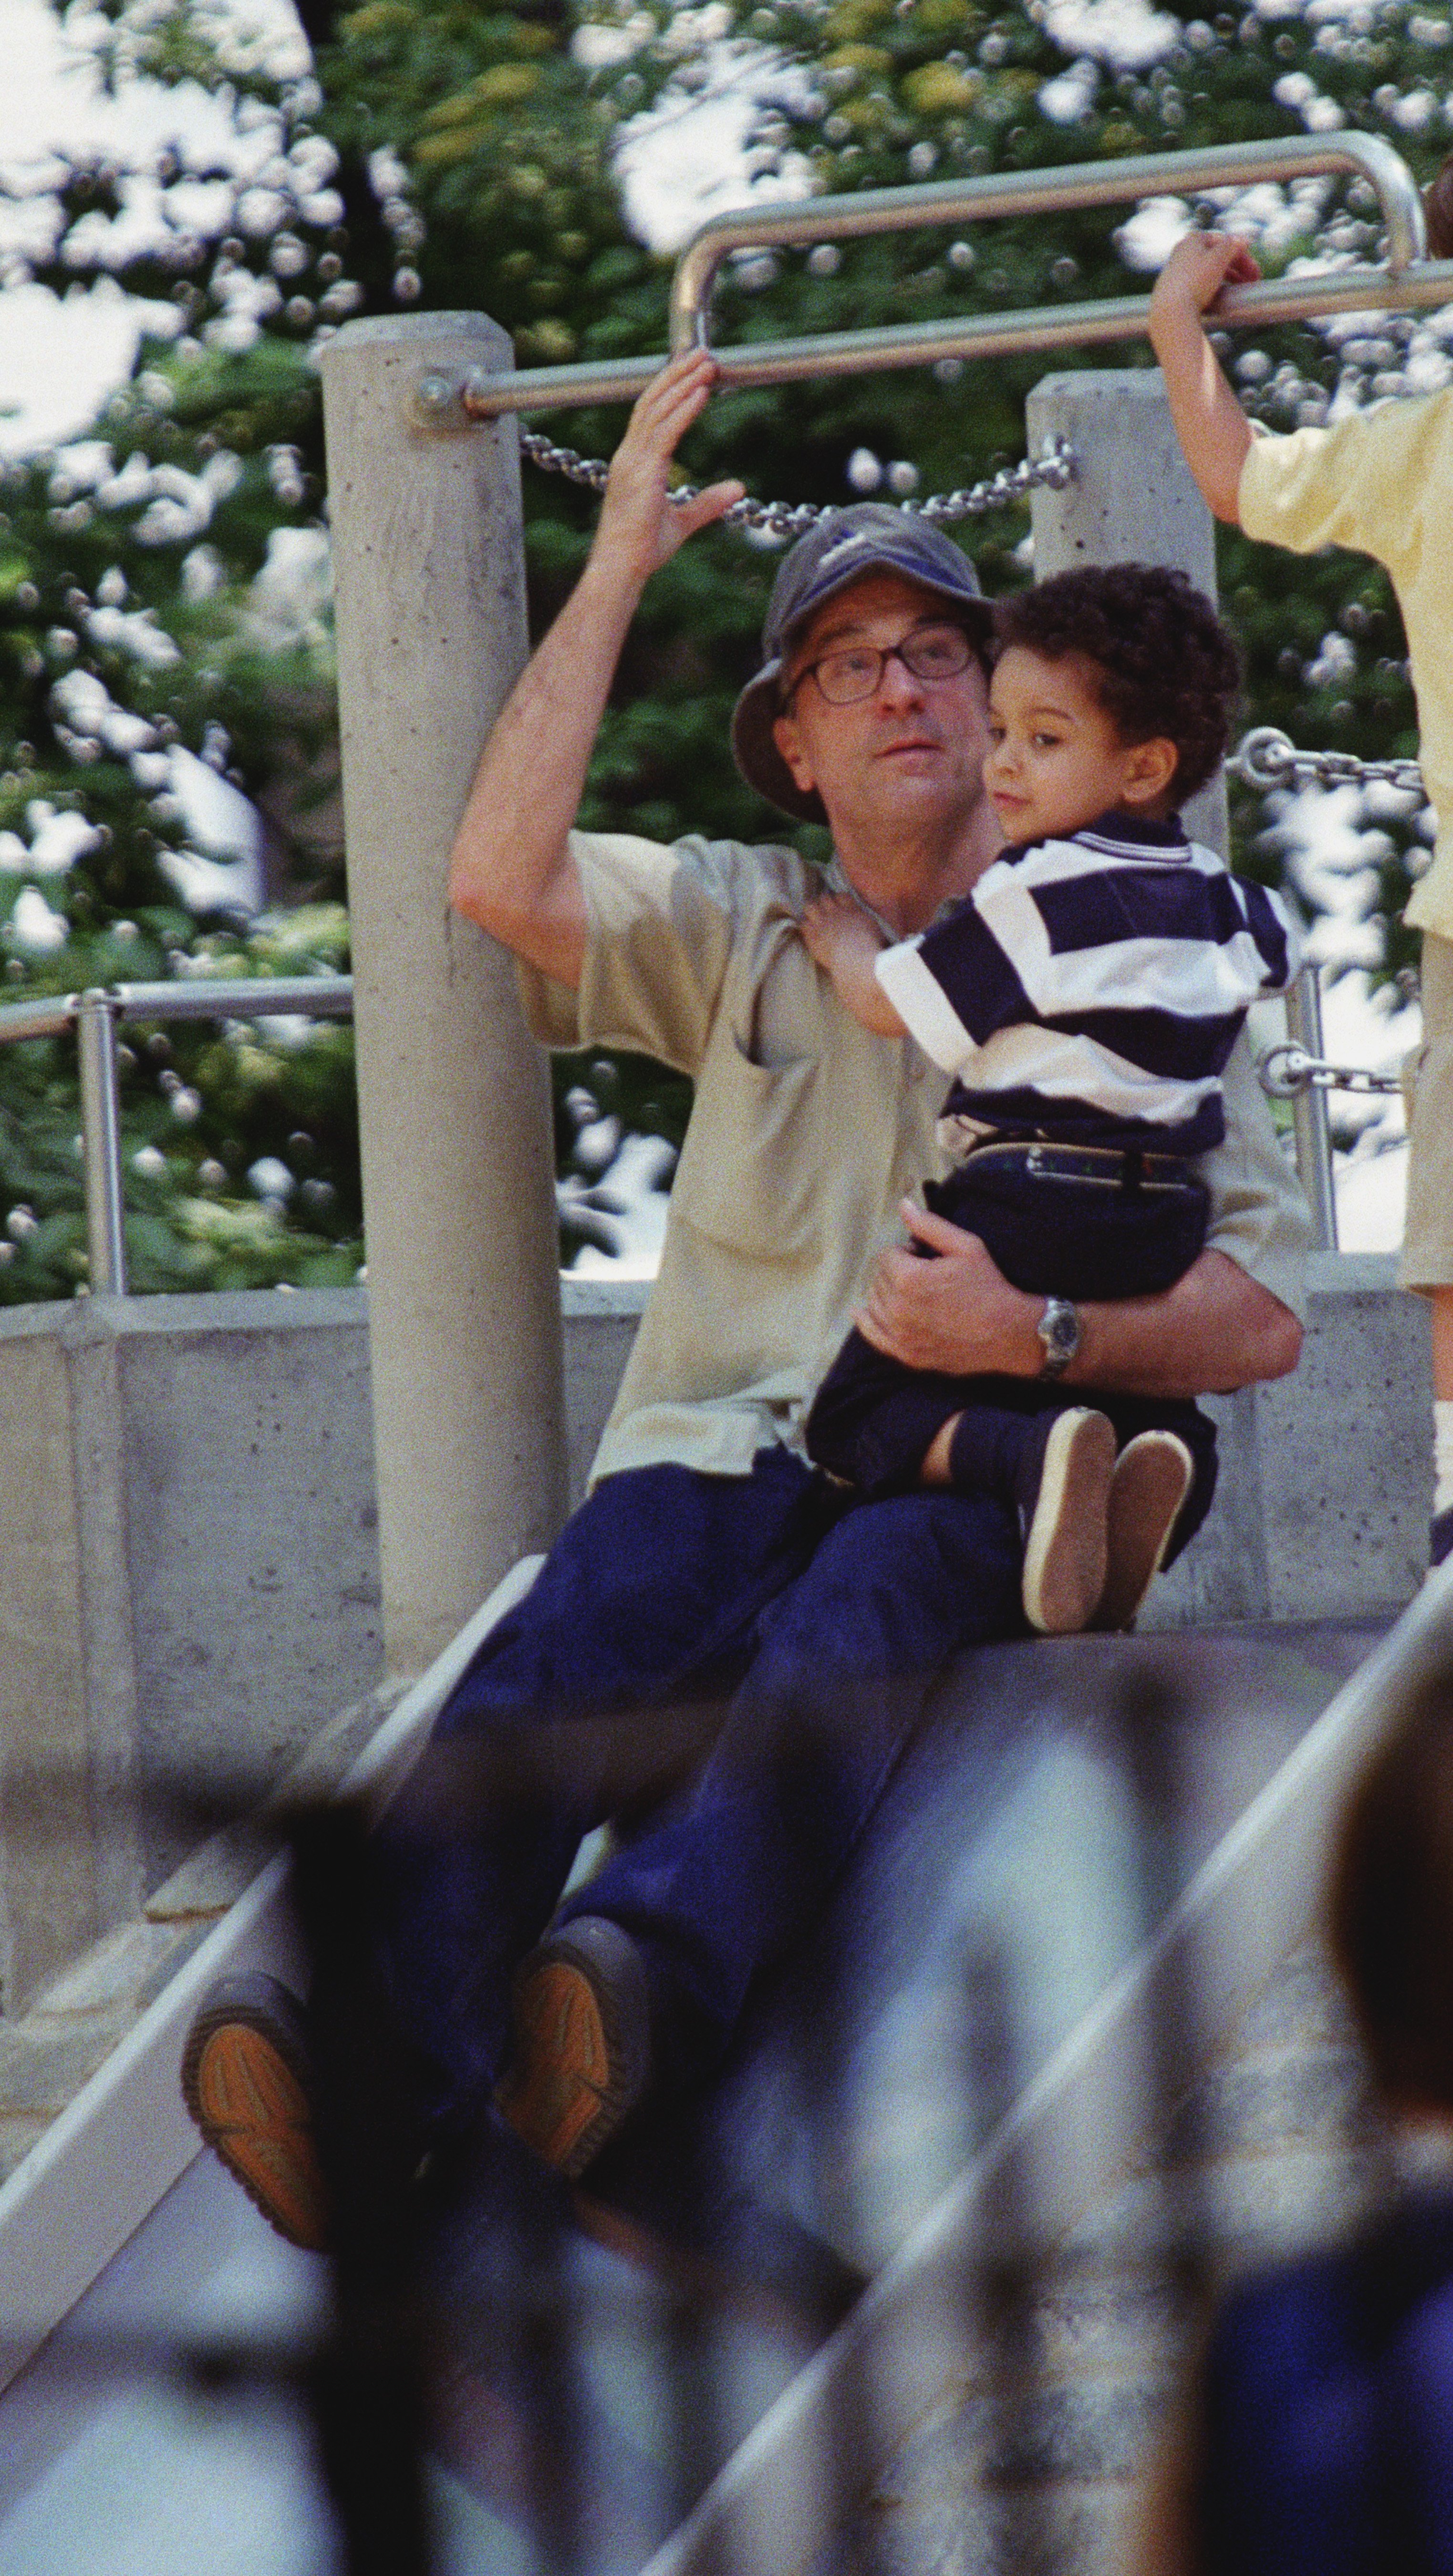 Robert De Niro and son, Elliot, on Sliding Pond in Central Park, NYC on May 11, 2001 | Source: Getty Images 